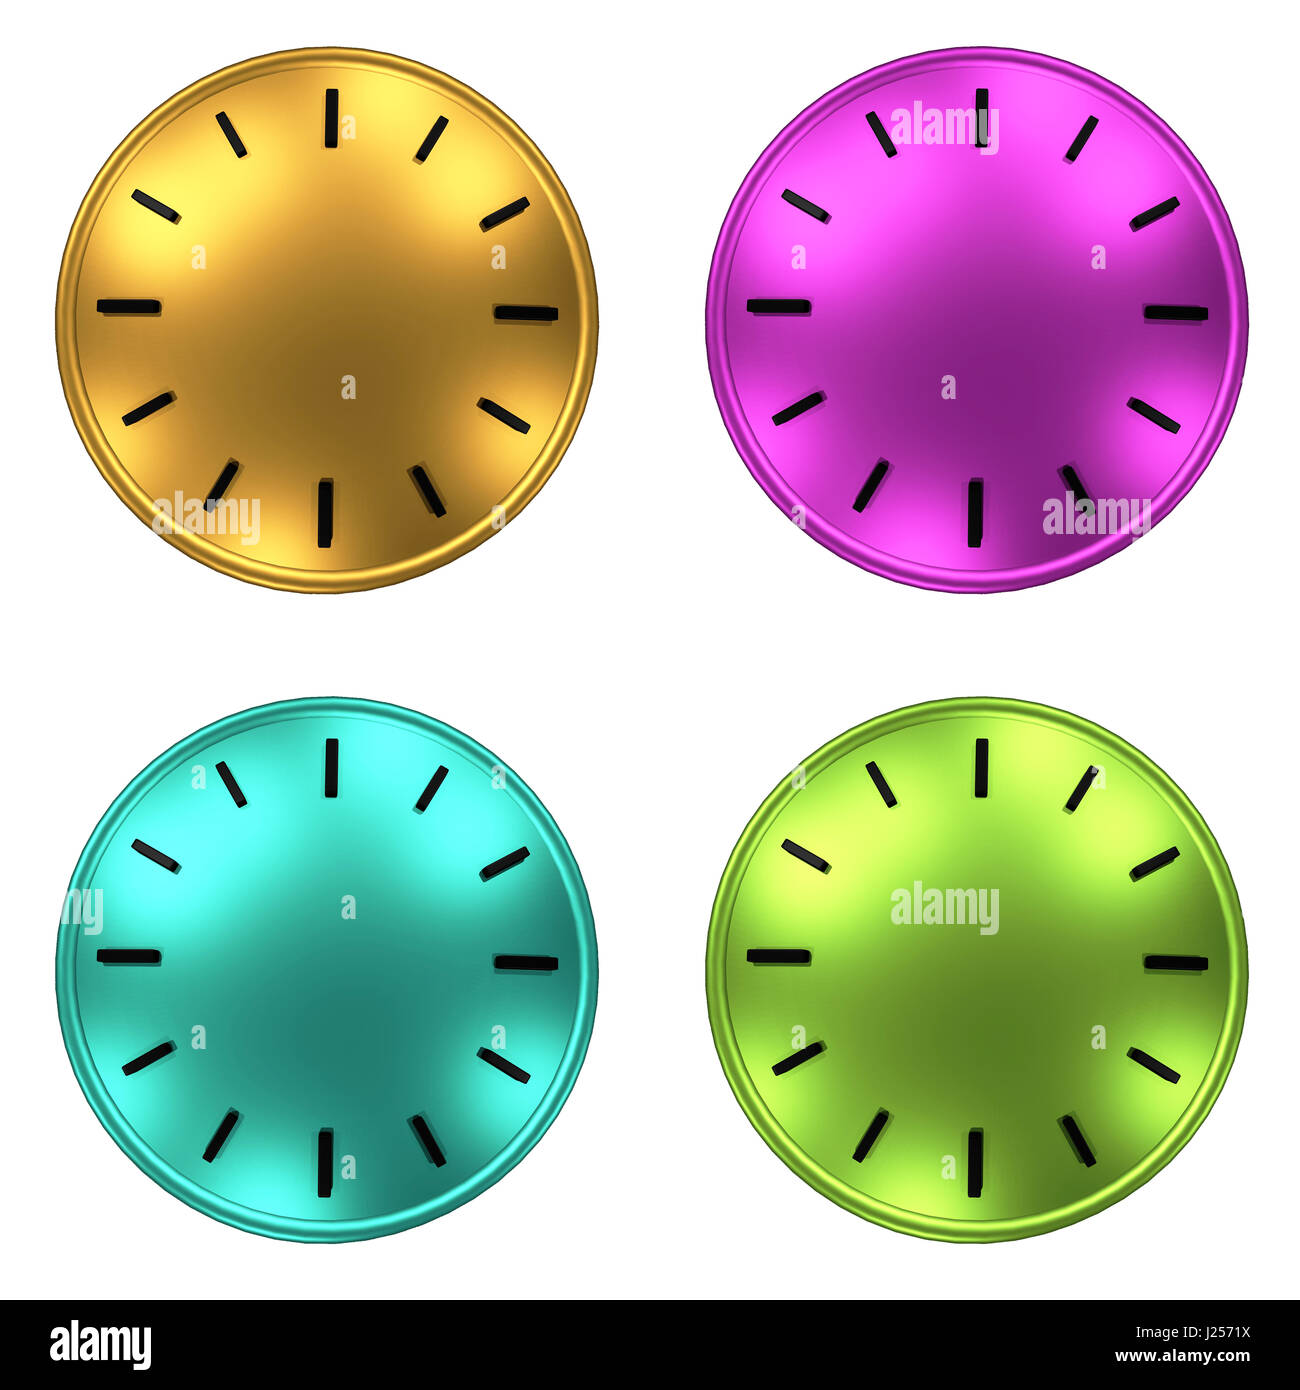 clock without arrows 3D illustration Stock Photo